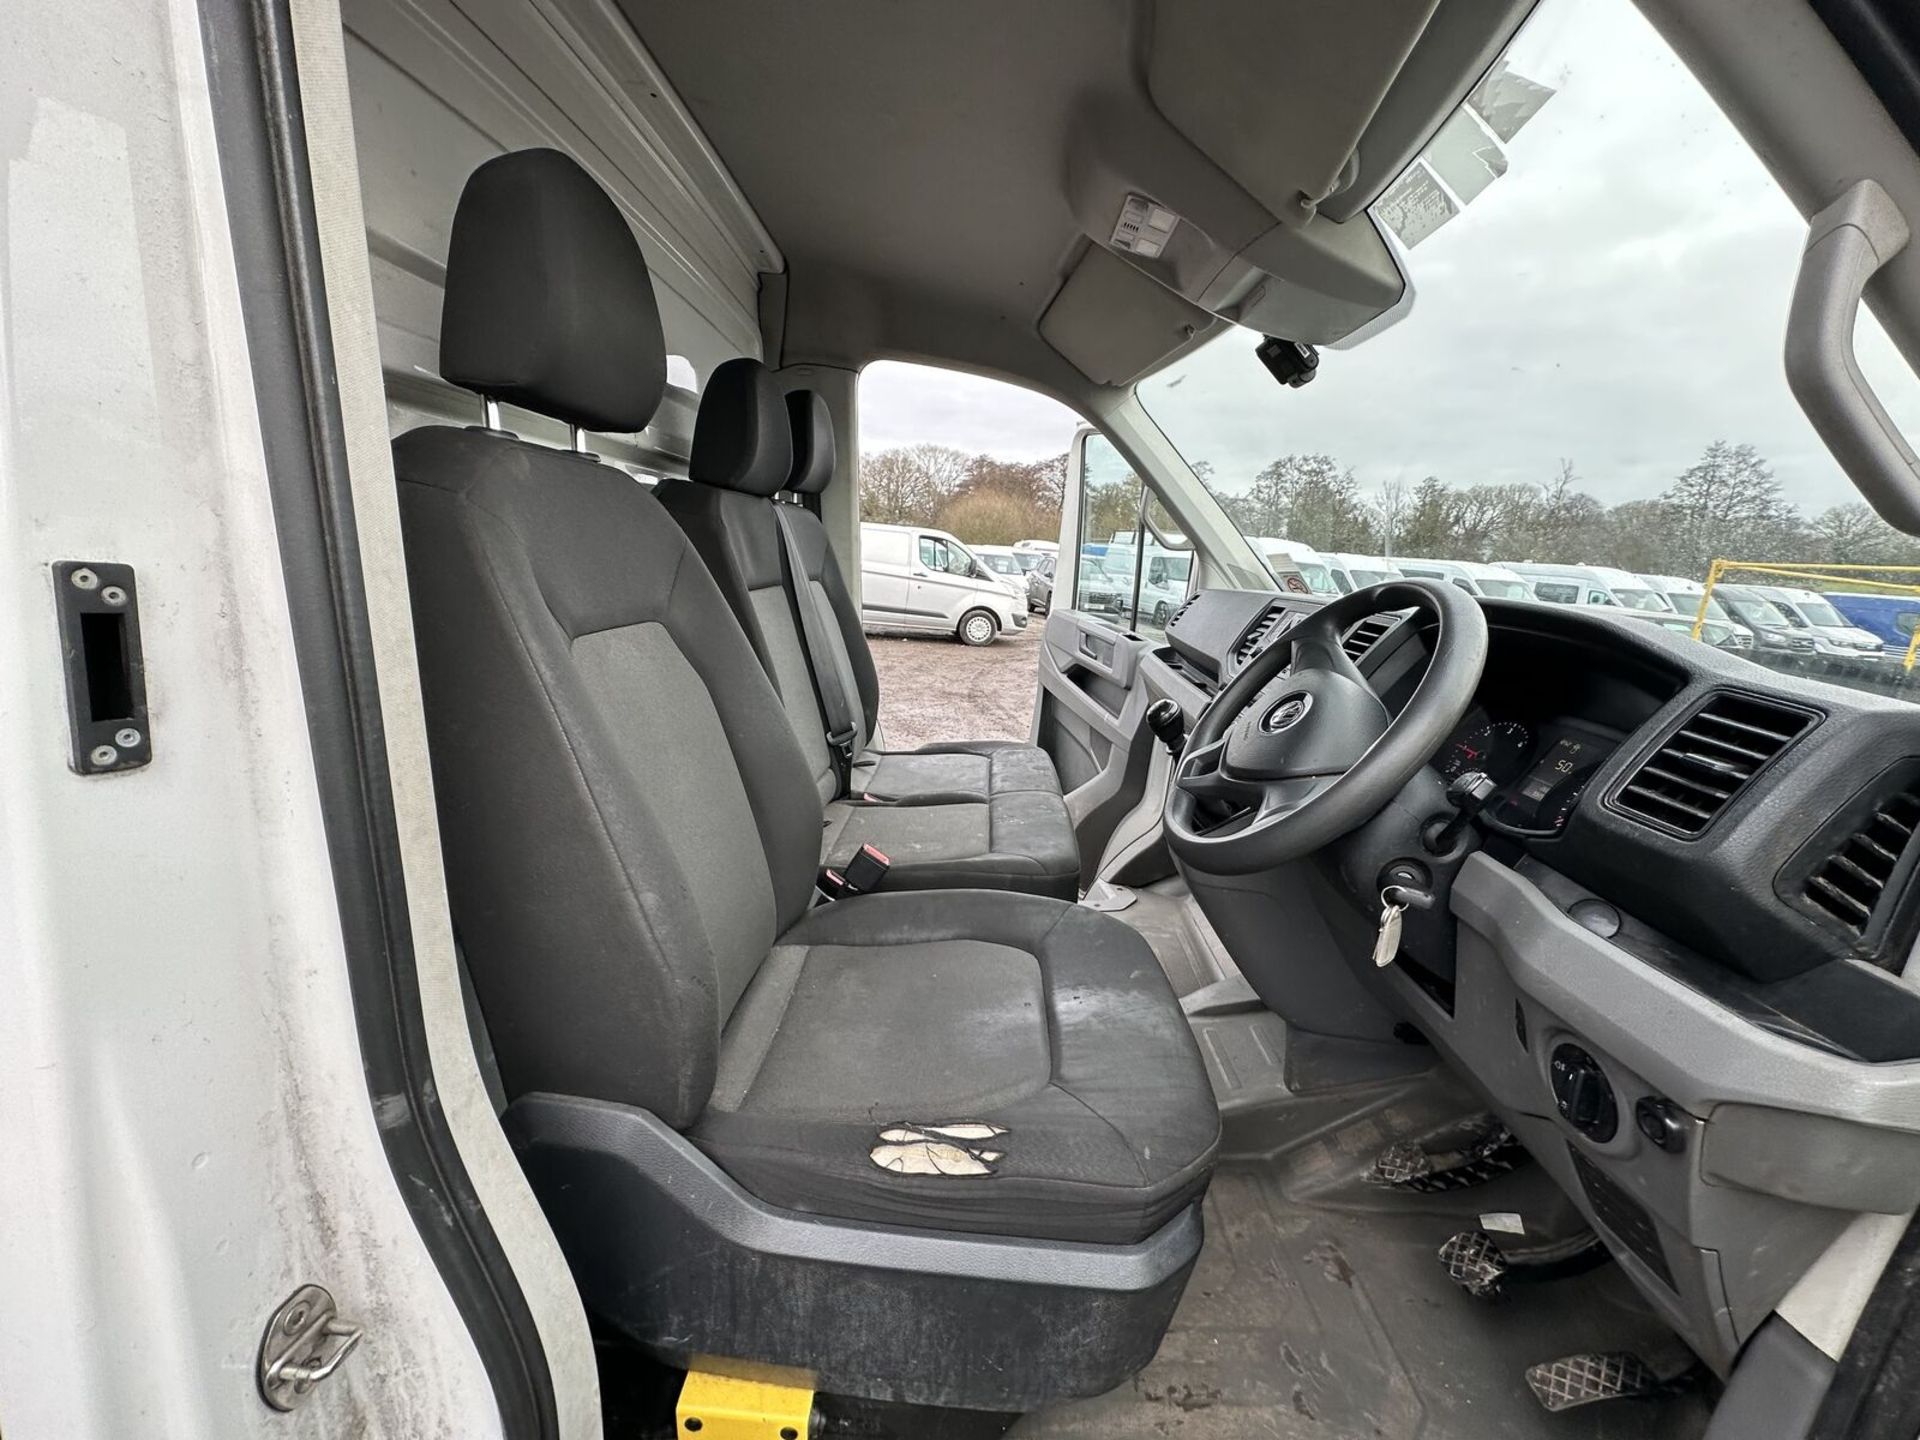 DEPENDABLE DRIVE: 2018 VW CRAFTER CR35 LWB 2.0 TDI FWD - Image 10 of 16